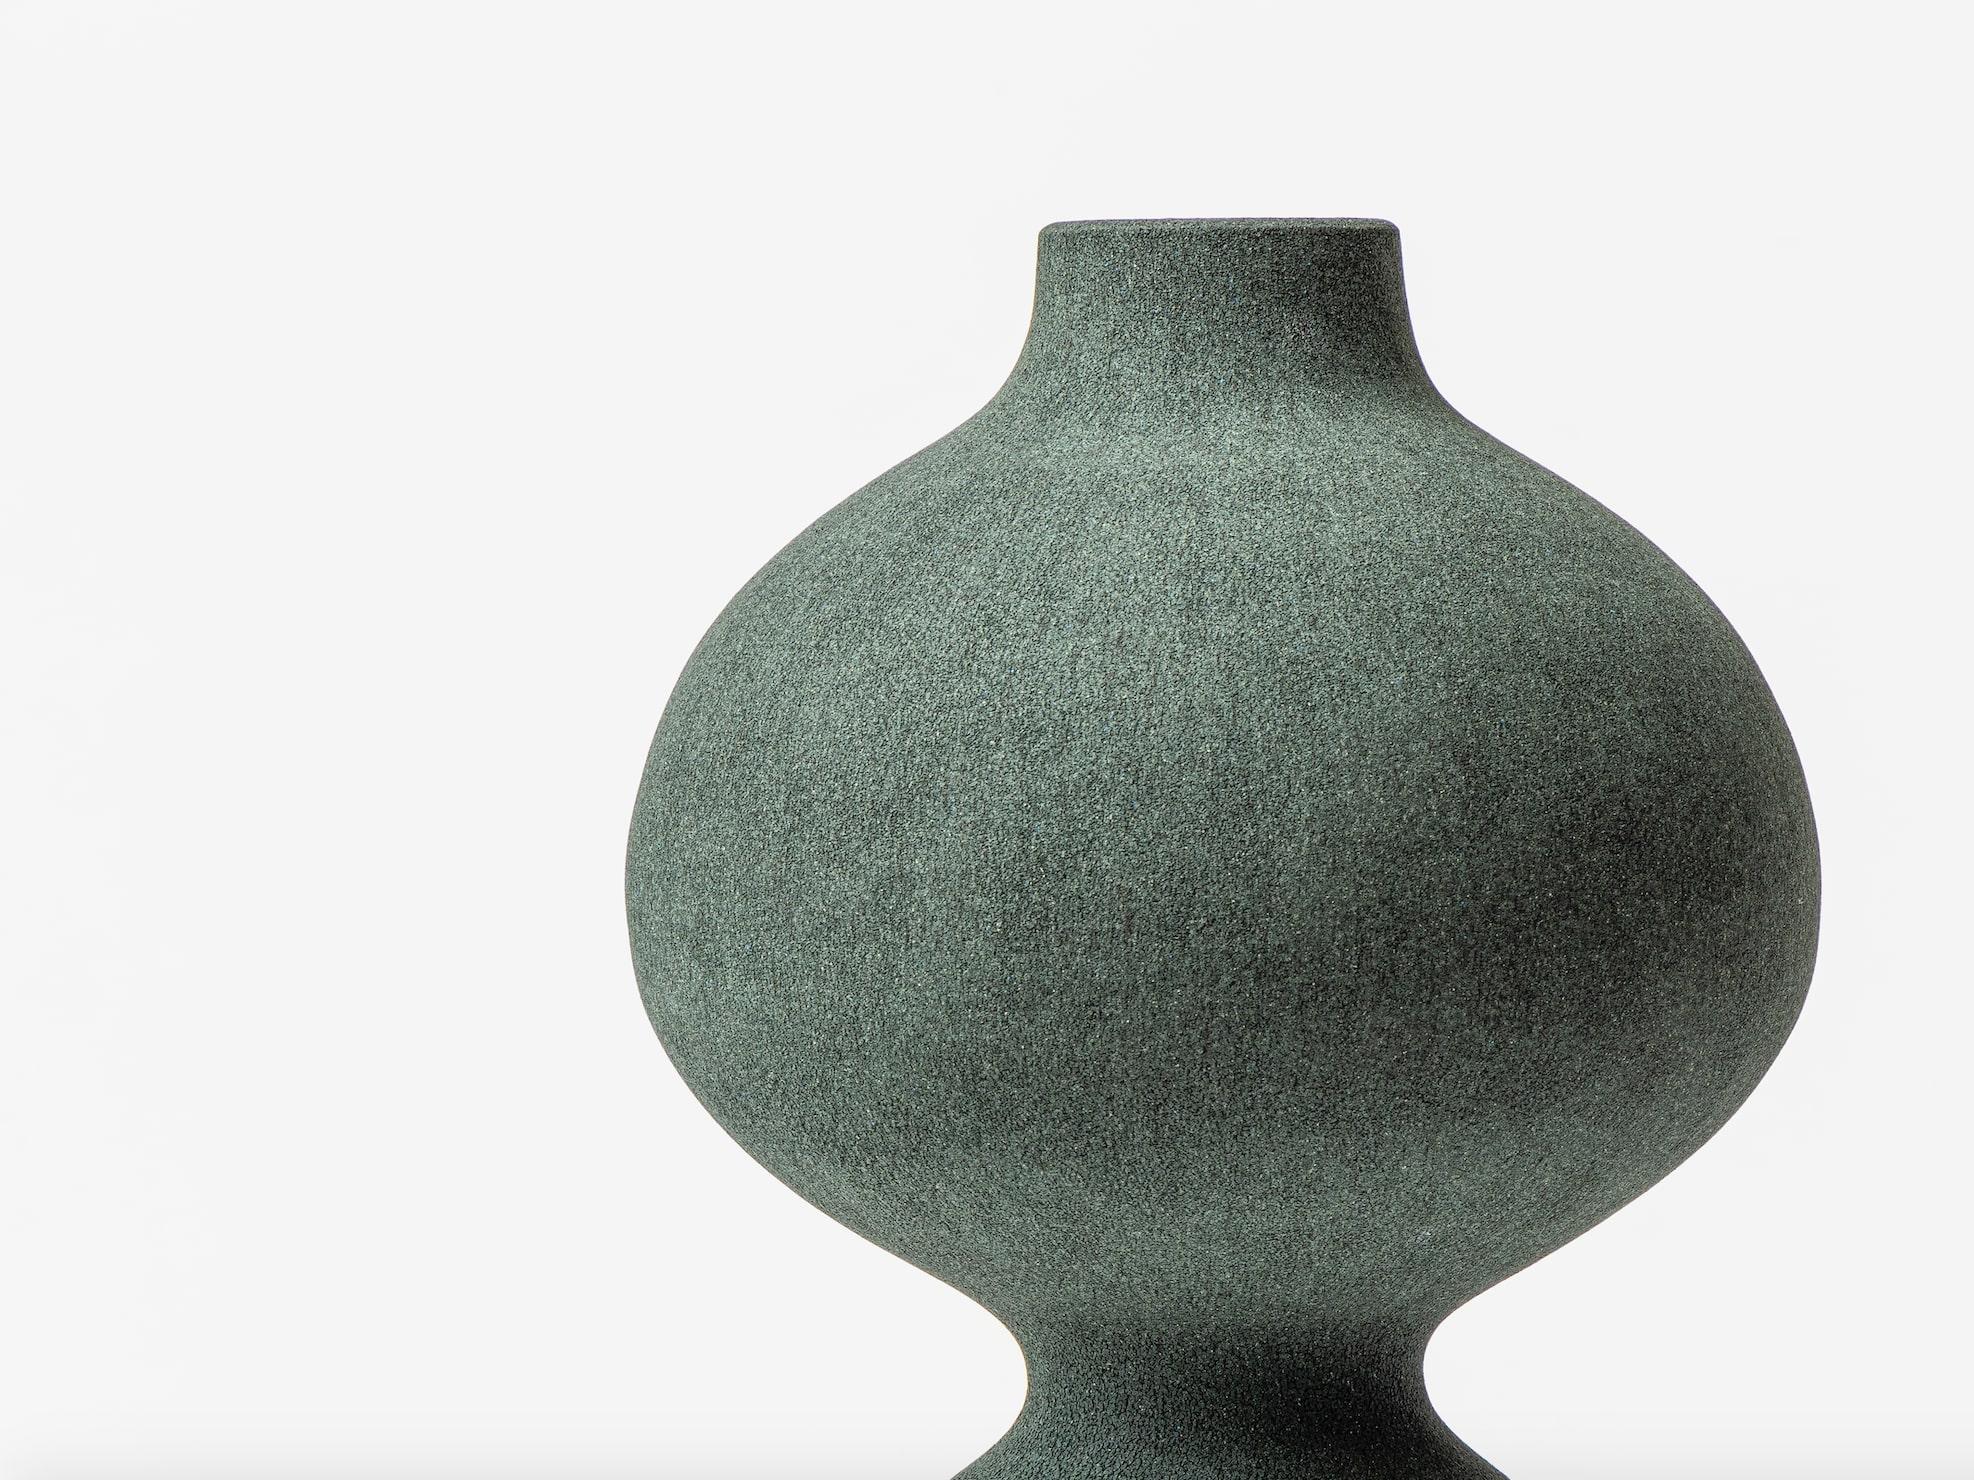 Baluster Vase III, 2023, (Ceramic, C. 14.5 in. h x 8.2 in. w x 8.2 in. d, Object No.: 4150)

Heisselberg Pedersen’s sculptures are hand-modeled from stoneware and glazed with slip-glazes, which give the works a stone-like, dry surface with a rich